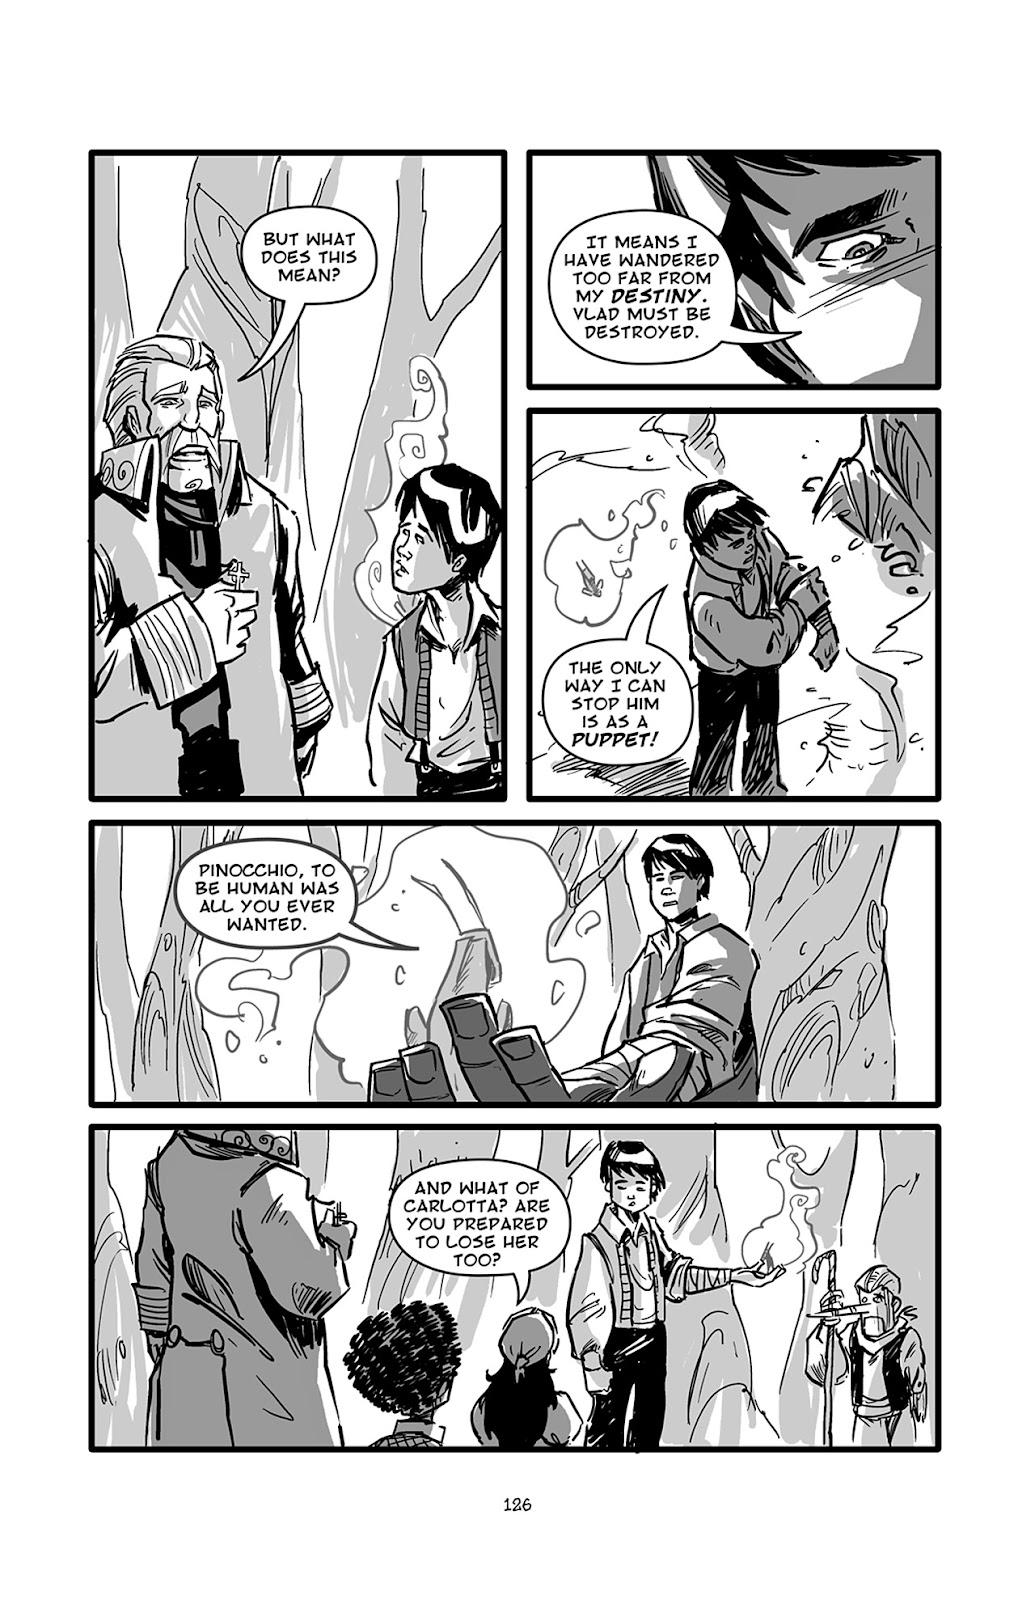 Pinocchio: Vampire Slayer - Of Wood and Blood issue 6 - Page 3